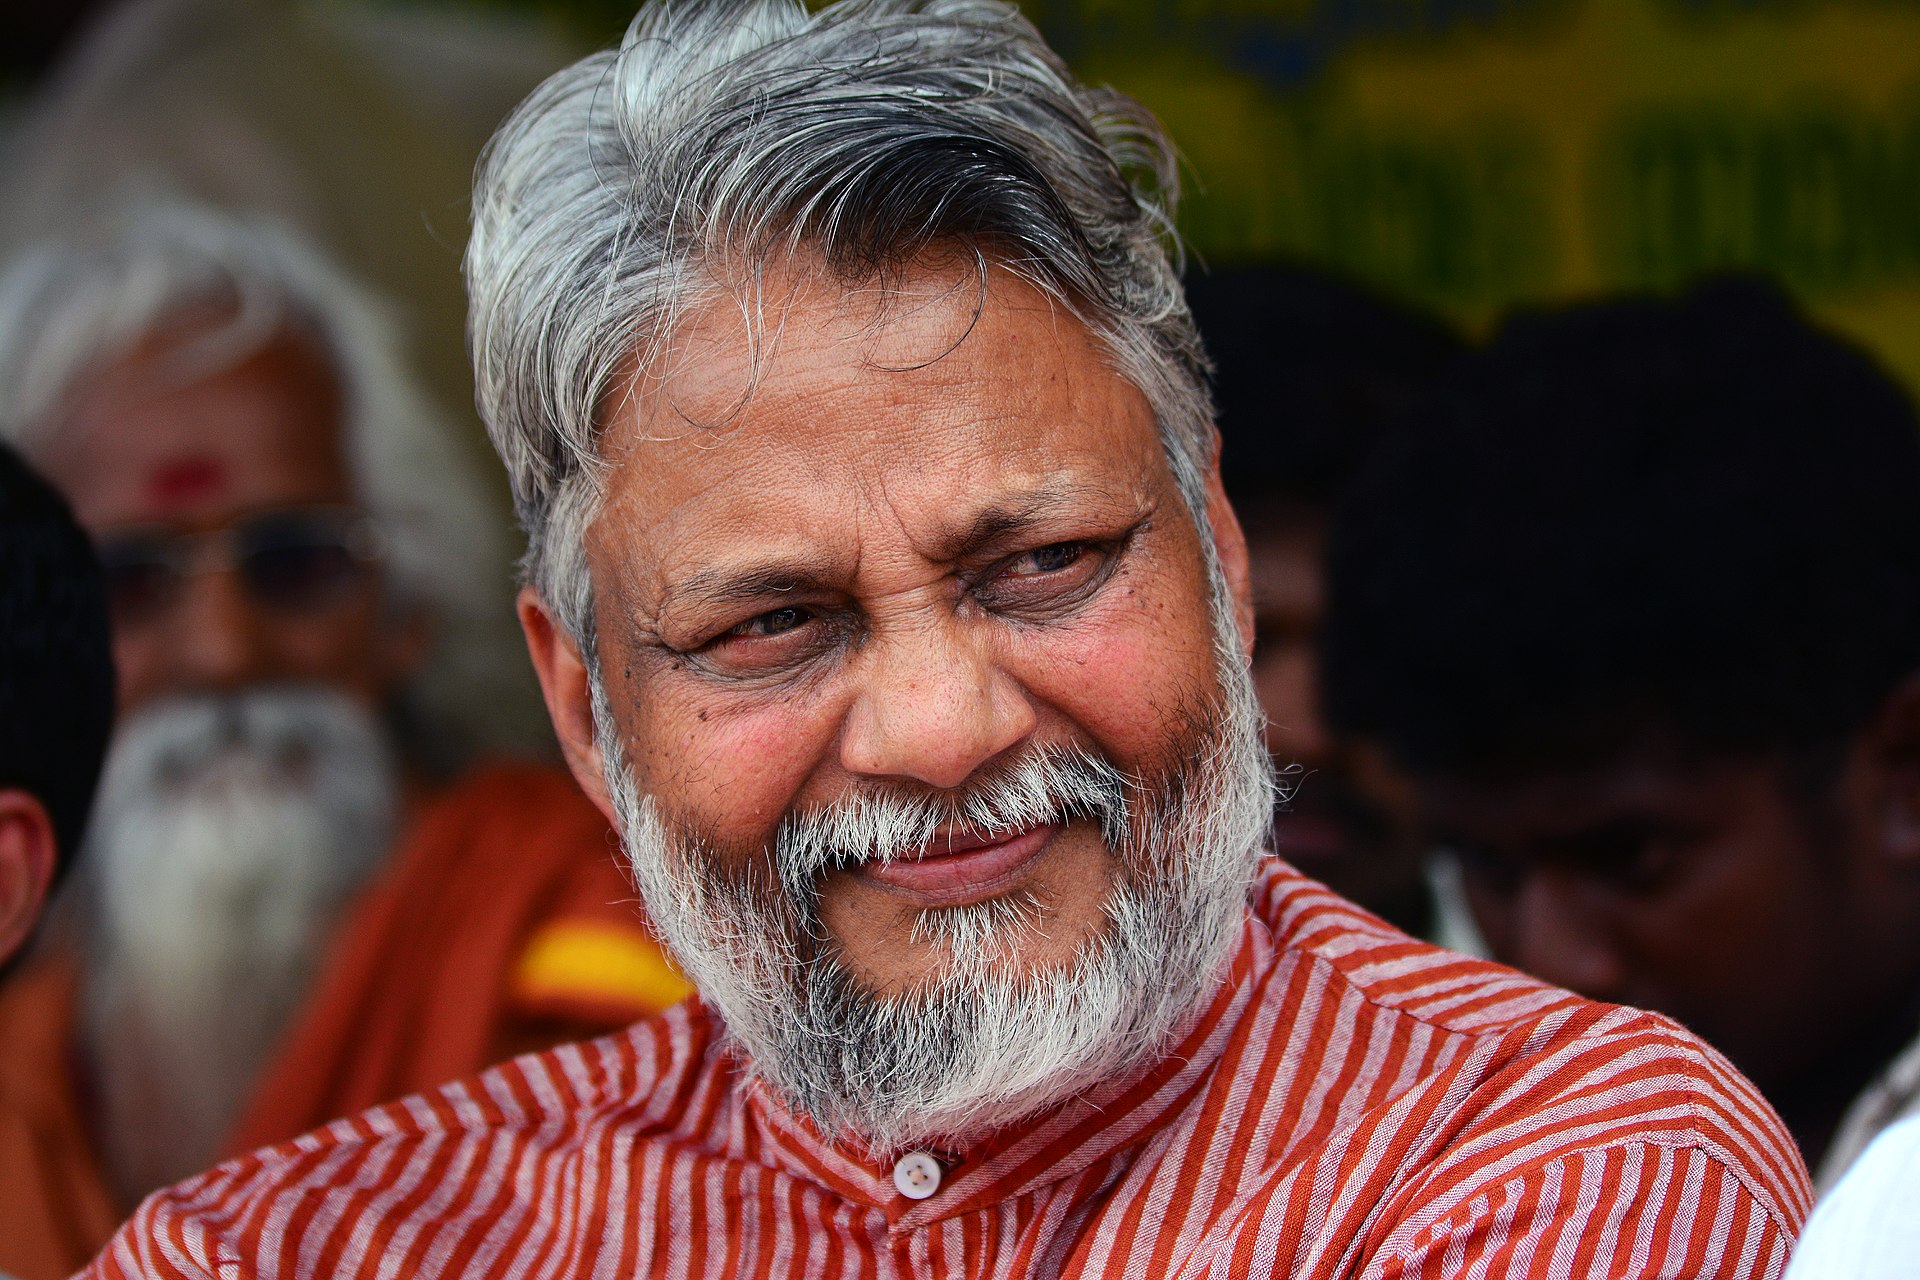 Ranjendra Singh has conducted water regeneration projects in rivers in India